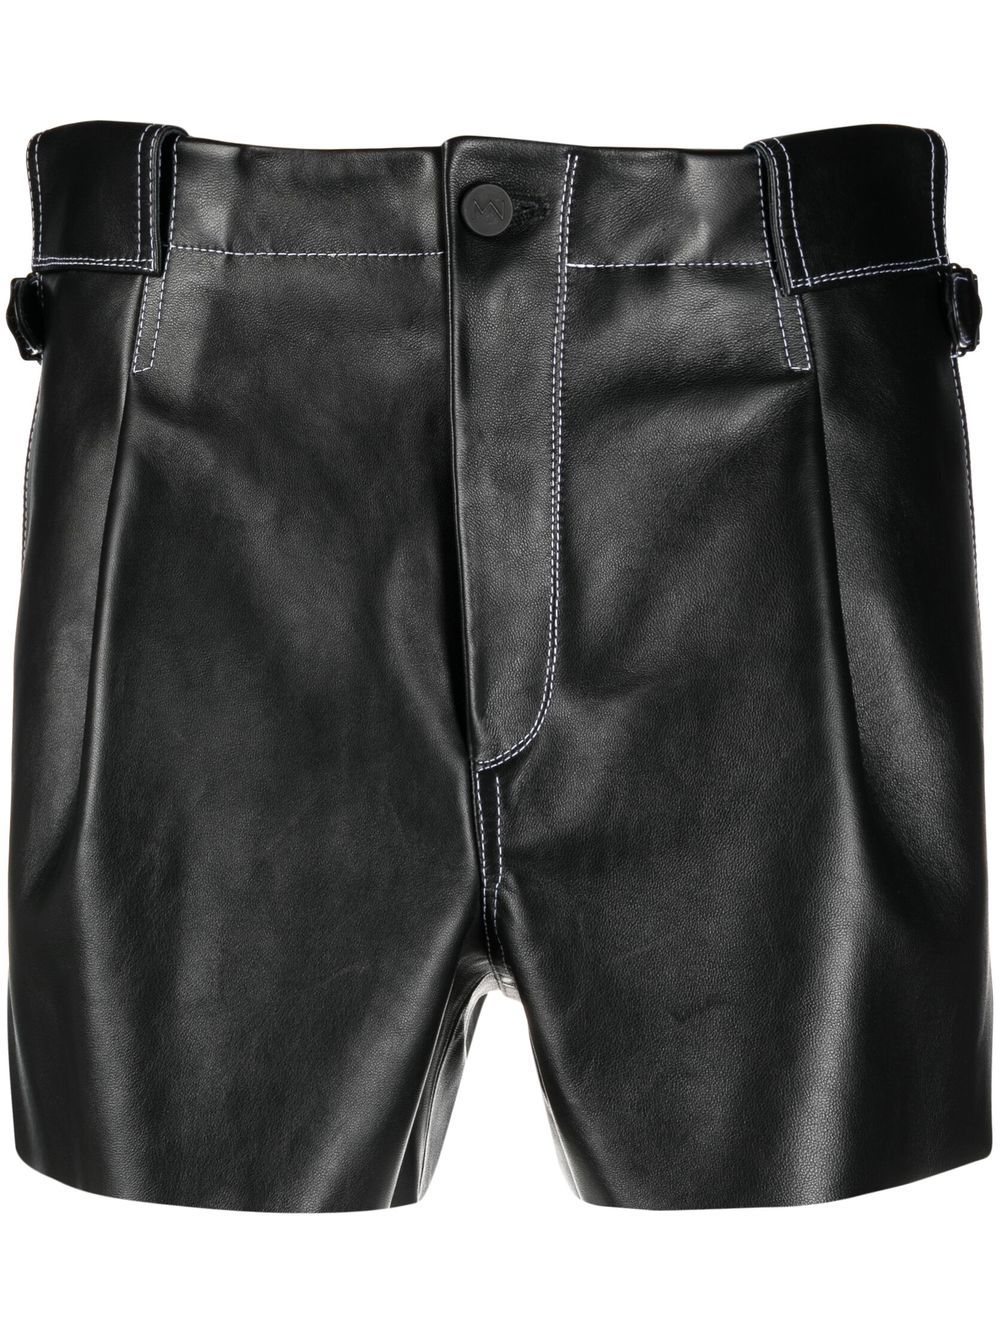 THE MANNEI HIGH-RISE TAILORED SHORTS